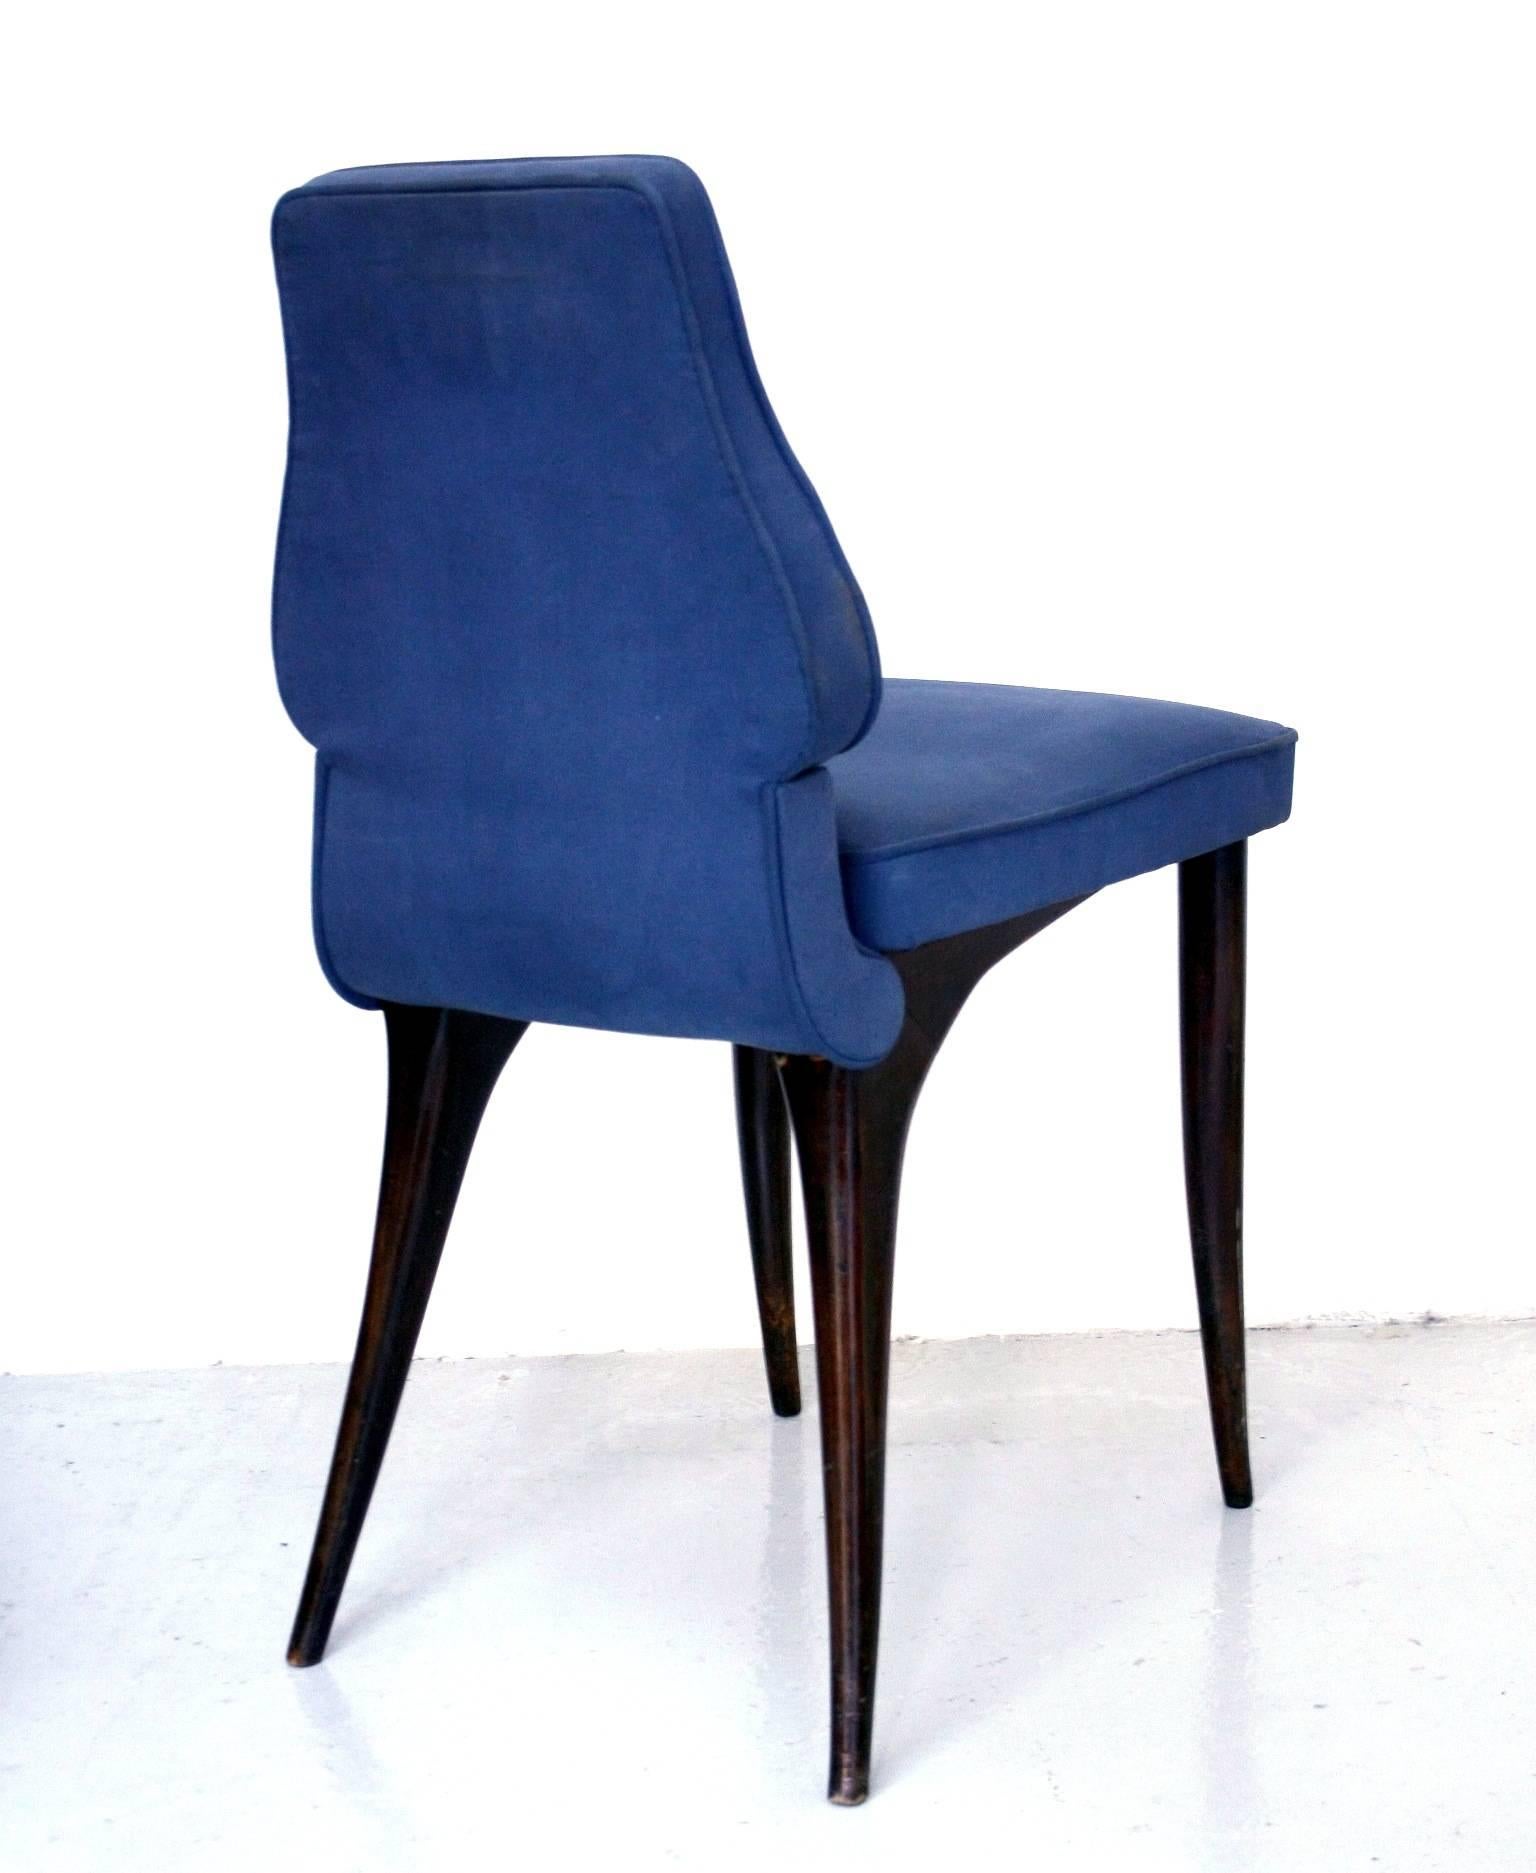 Aldo Morbelli Midcentury Wood Beech and Blue Fabric Italian Chairs, circa 1950 In Good Condition For Sale In Torino, Piemonte